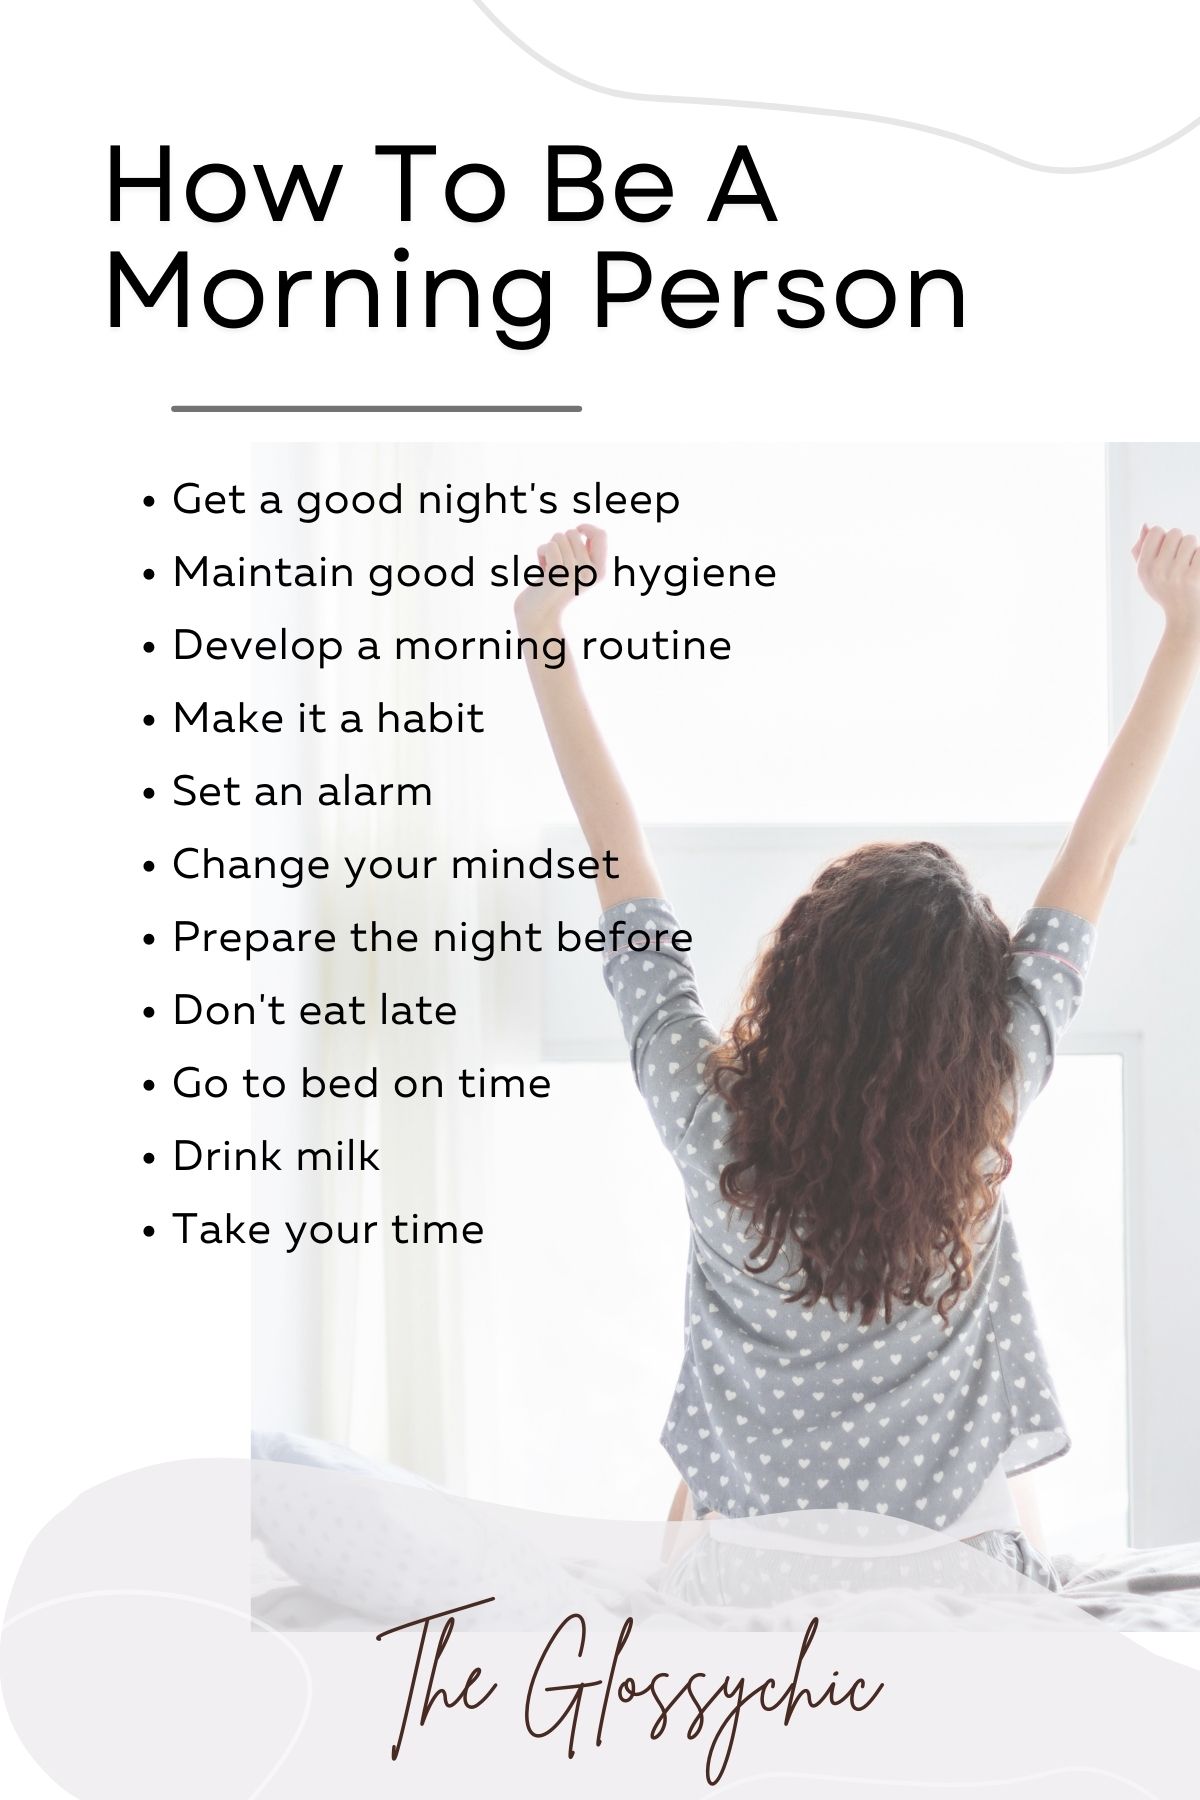 How To Be A Morning Person